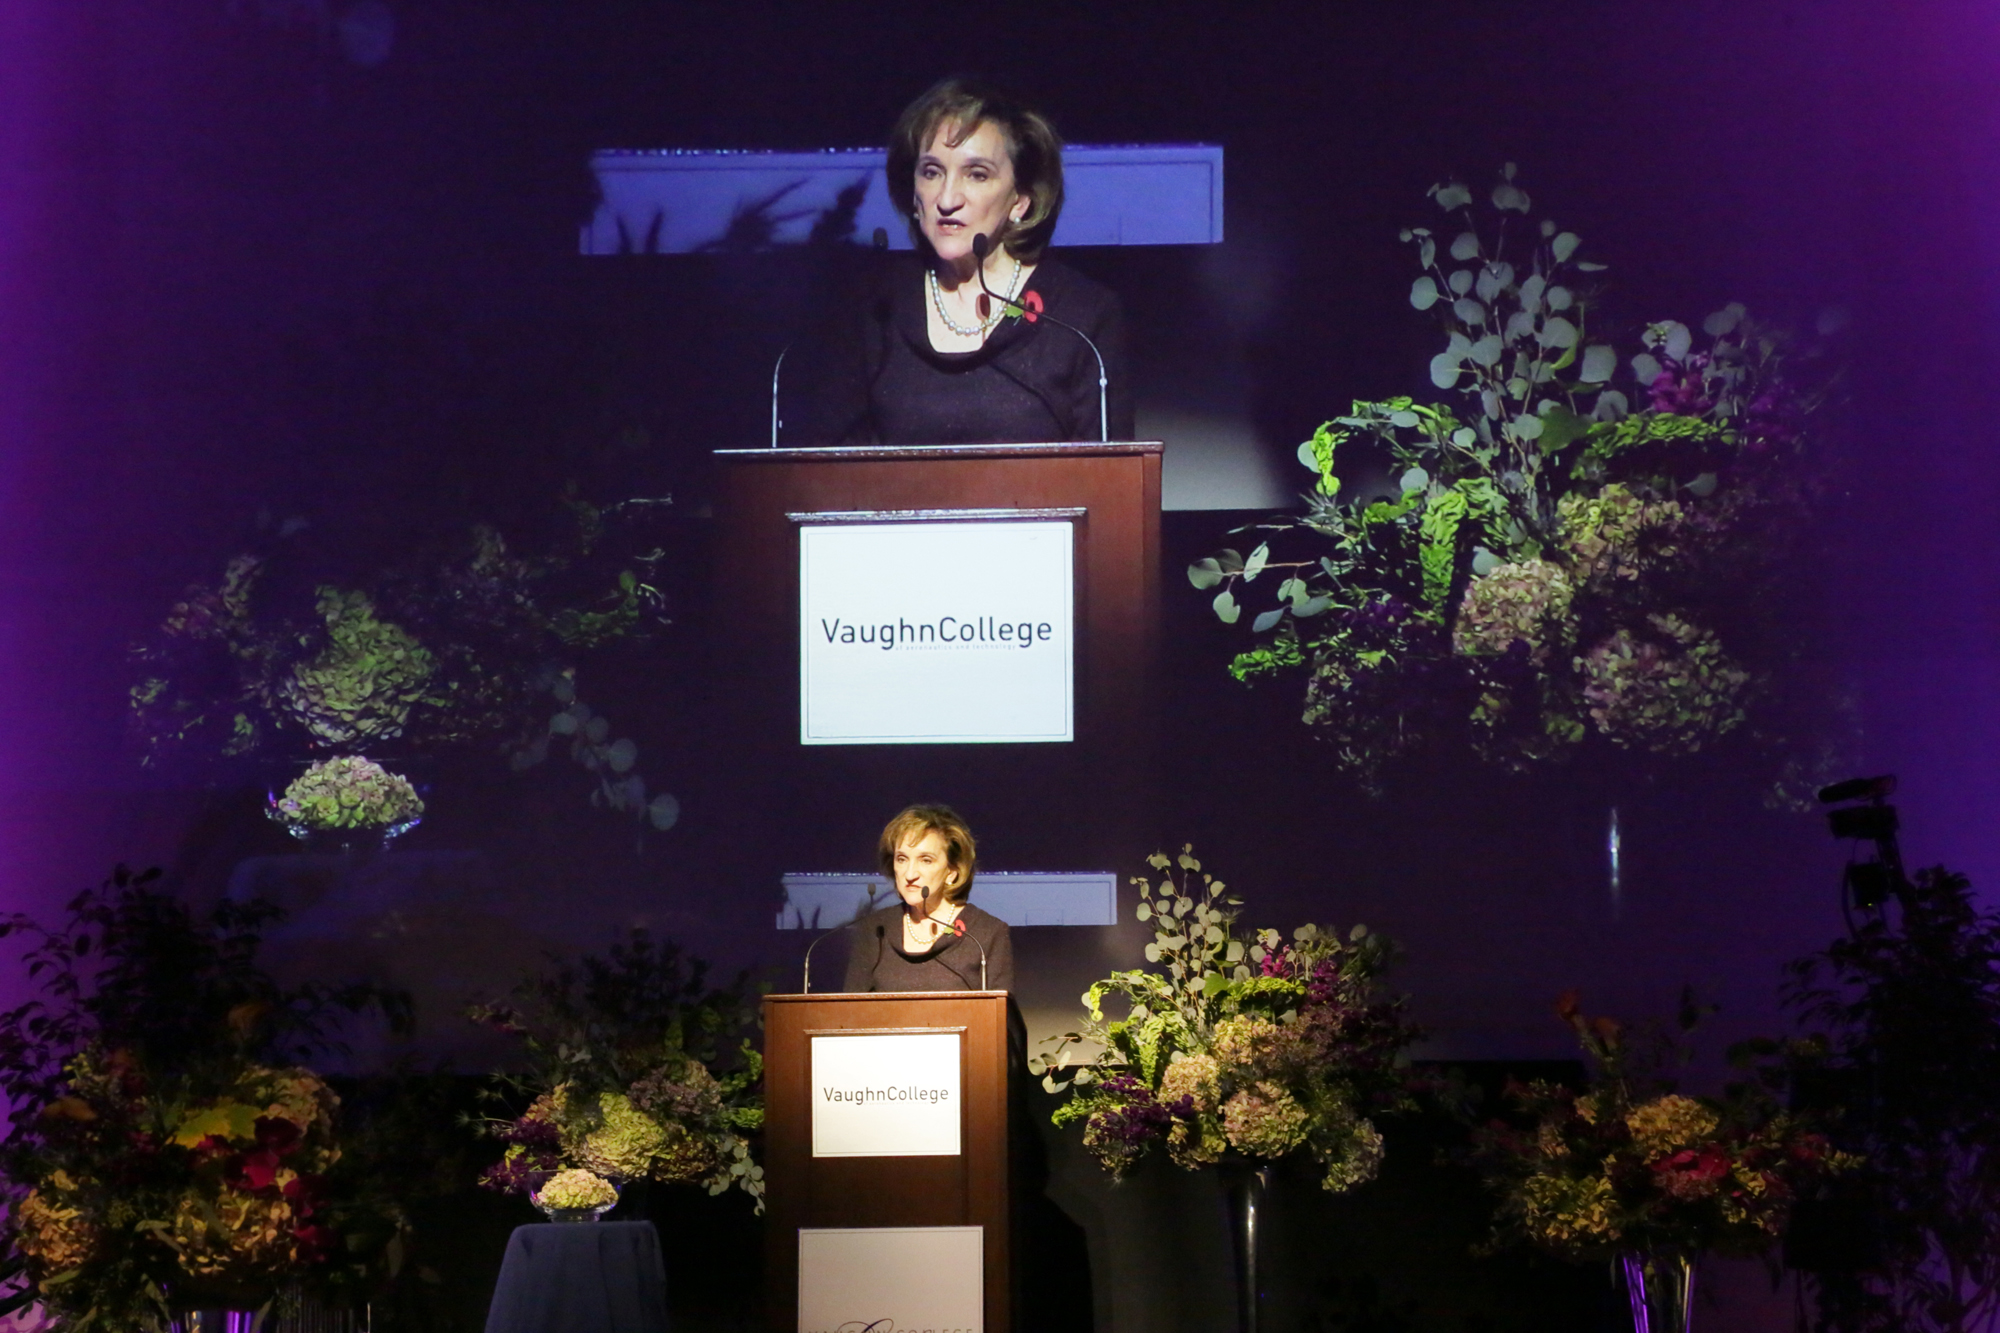 Vaughn College Gala Honors Marion C. Blakey, President and CEO of Rolls-Royce North America